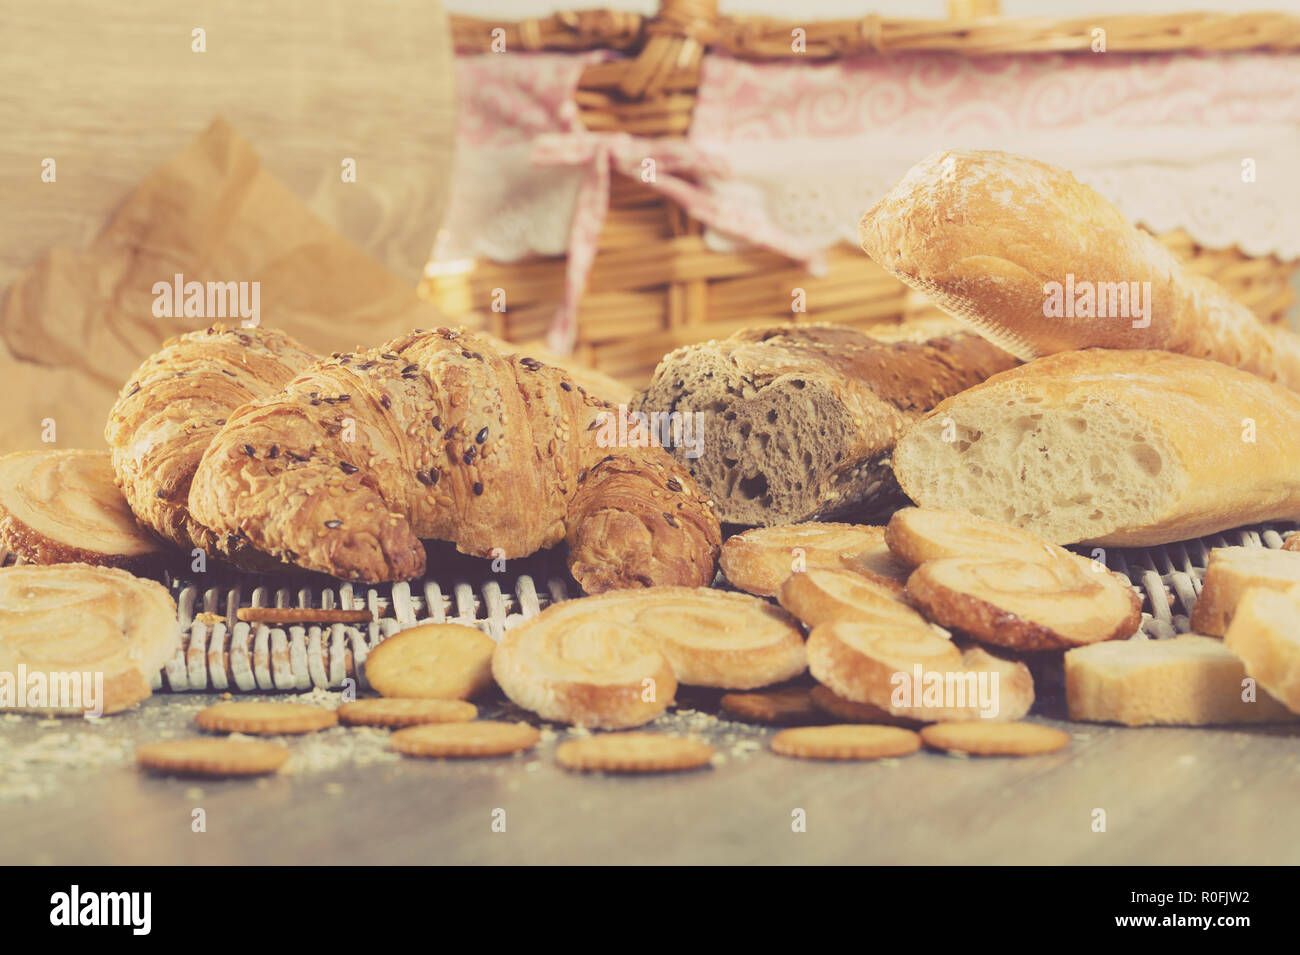 Various bakery and pastry products on rattan mat on wooden table Stock Photo